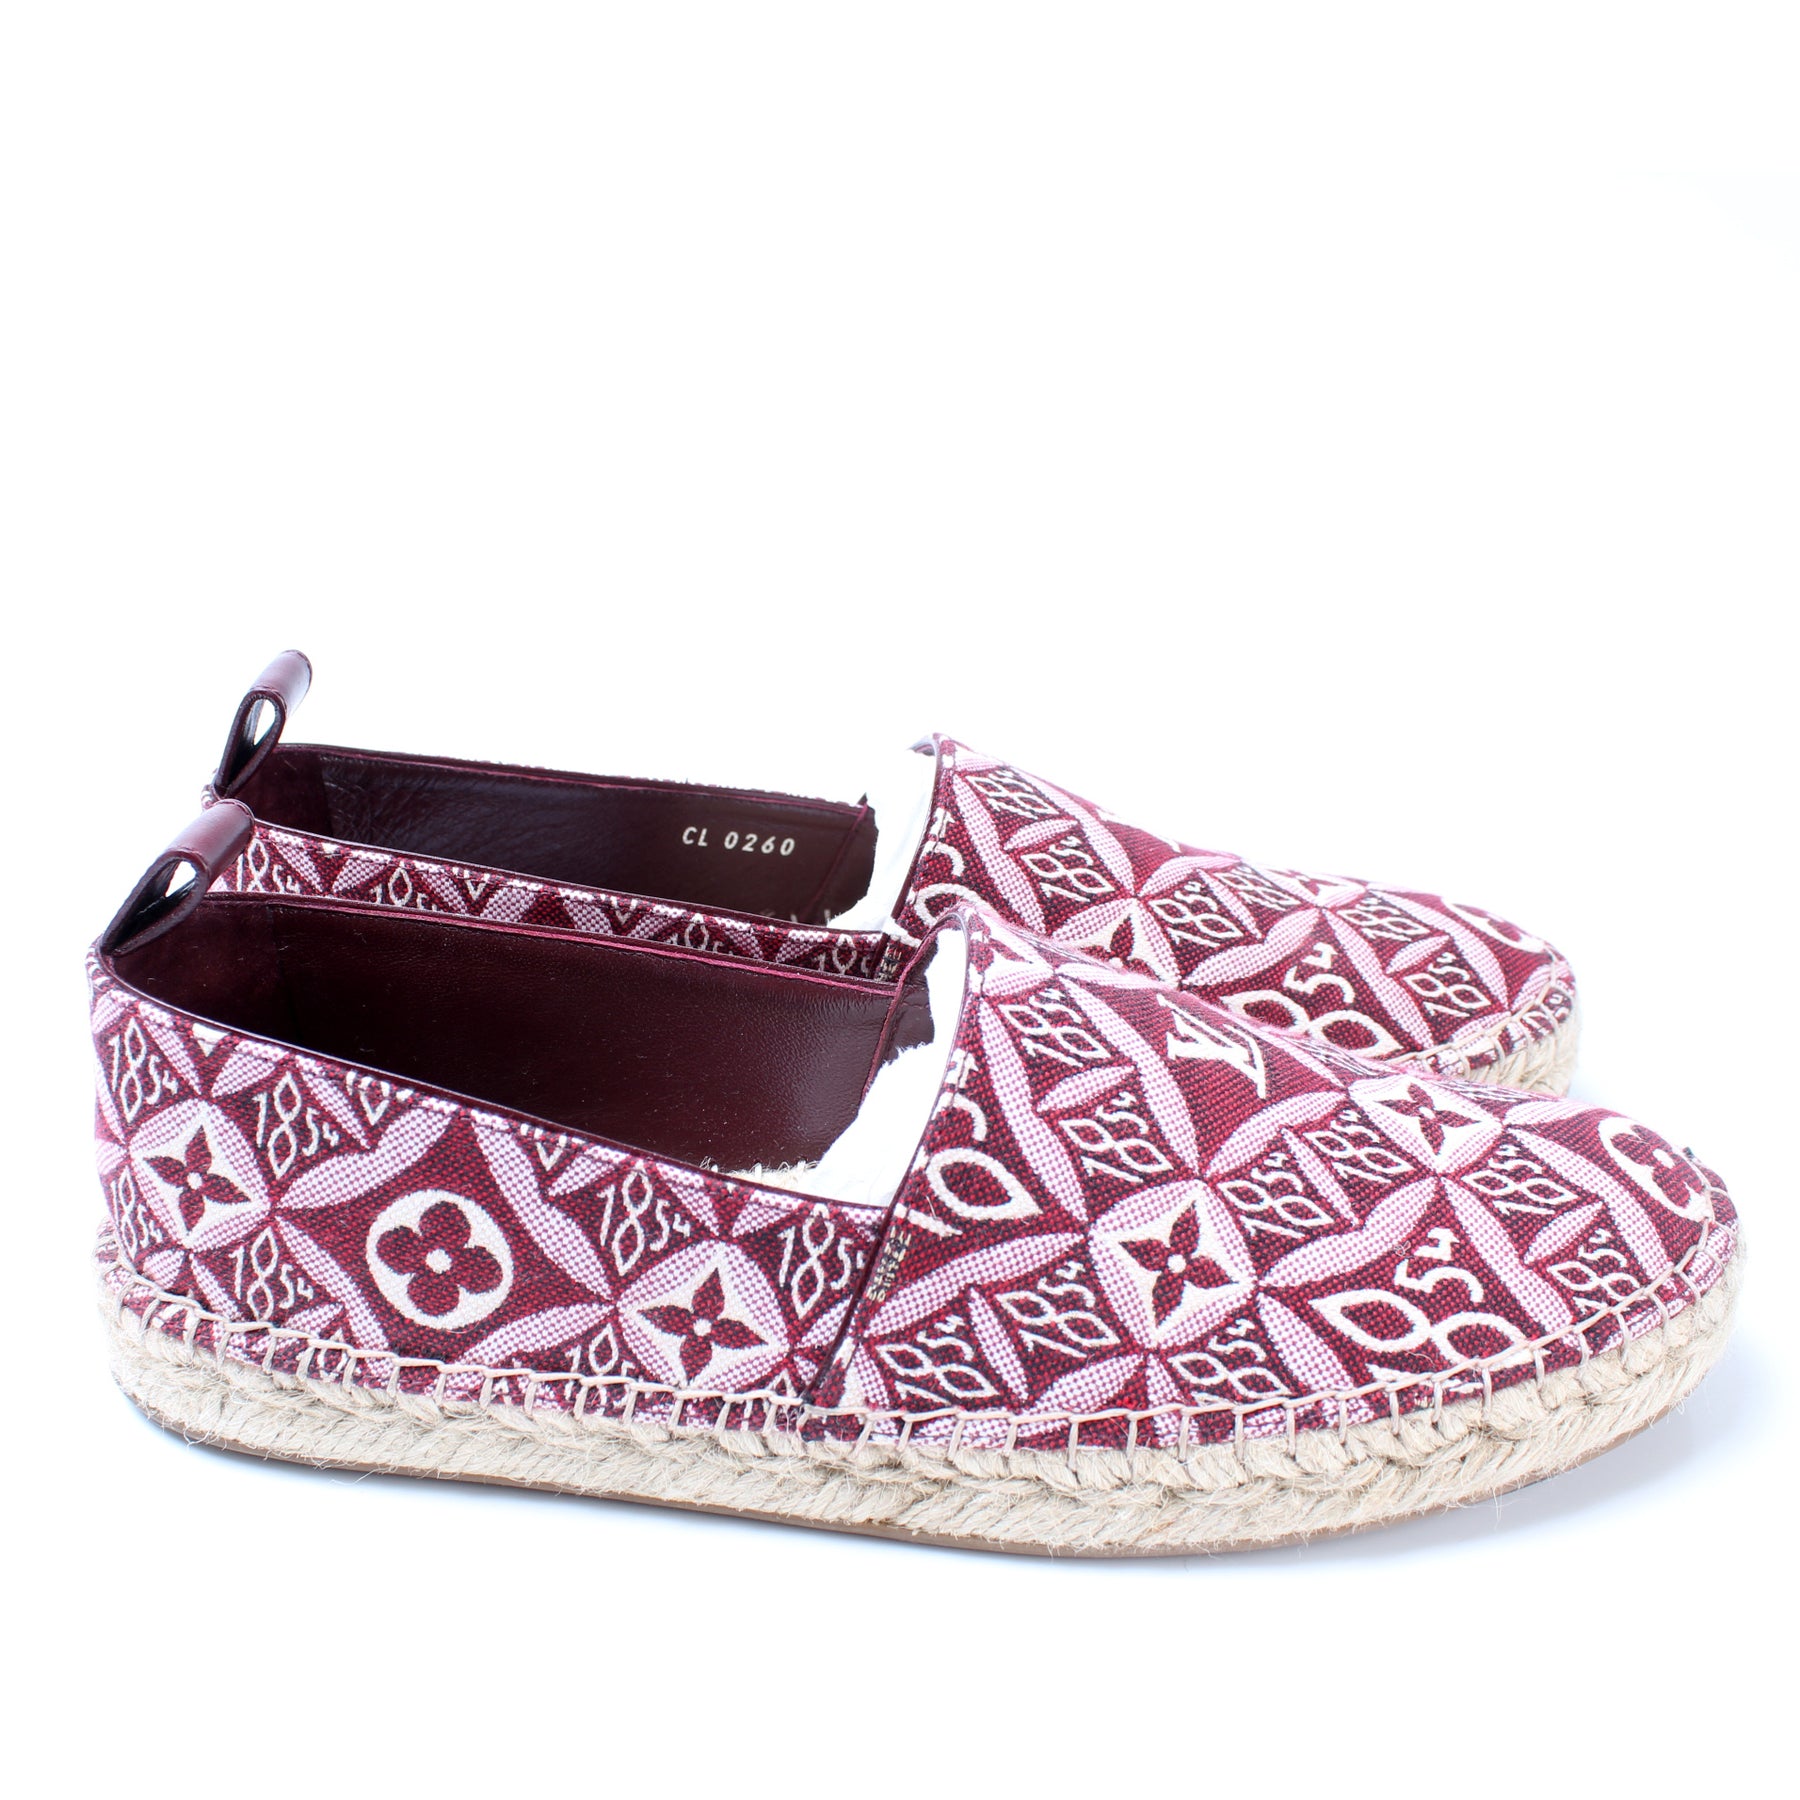 SINCE 1854 STARBOARD FLAT ESPADRILLE 1A8D4N SIZE 39.5